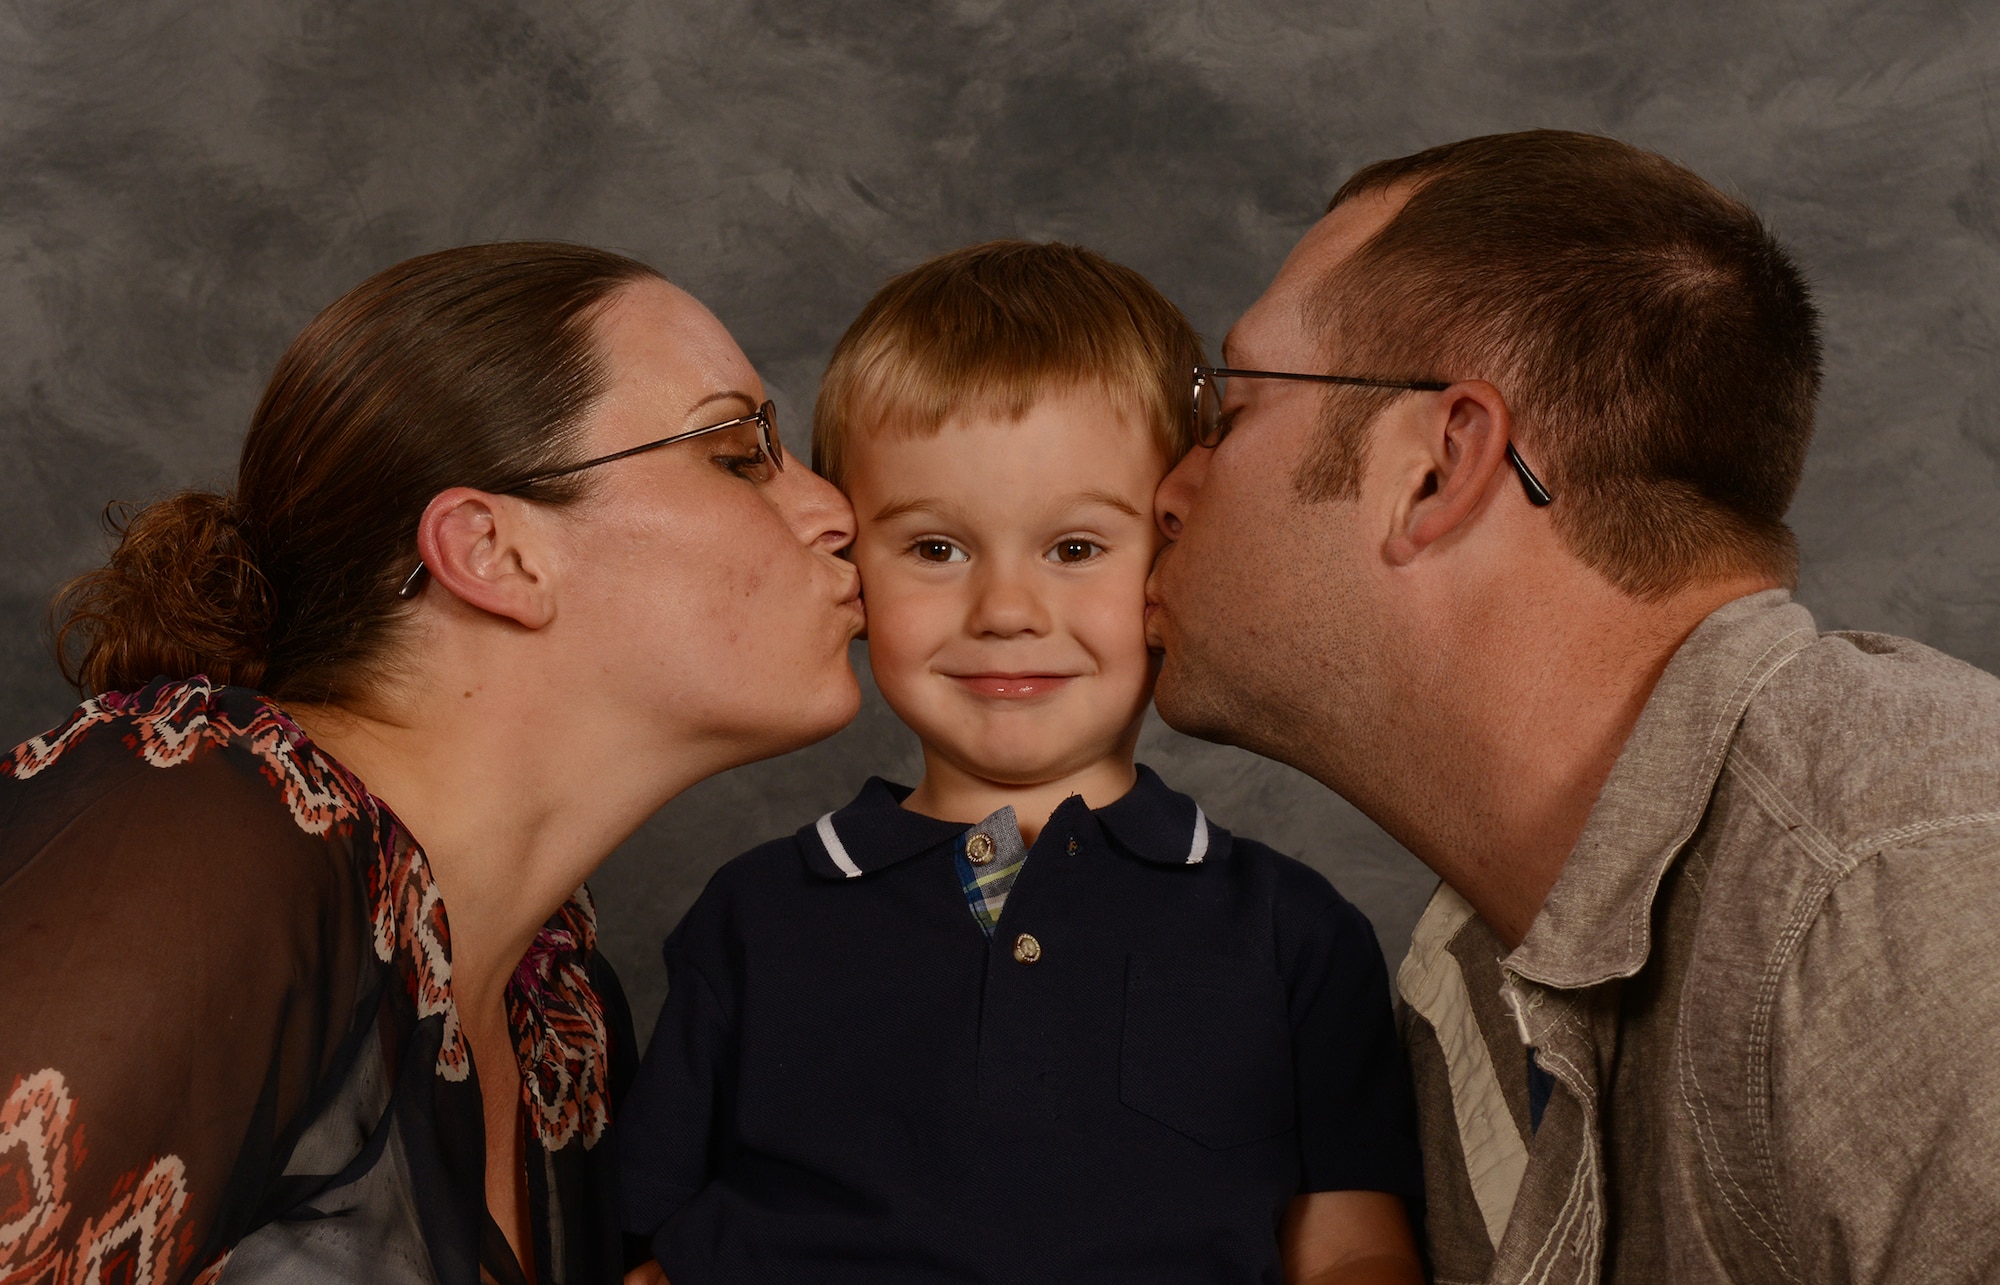 U.S. Air Force Staff Sgts. Amanda and Michael Griggs, 23d Component Maintenance Squadron aerospace propulsion craftsmen, kiss their son, Korbin, for a photo at Moody Air Force Base, Ga., May 8, 2014. Amanda Griggs has served seven years and is 24 weeks pregnant with her second child. (U.S. Air Force photo illustration by Senior Airman Tiffany M. Grigg/Released)